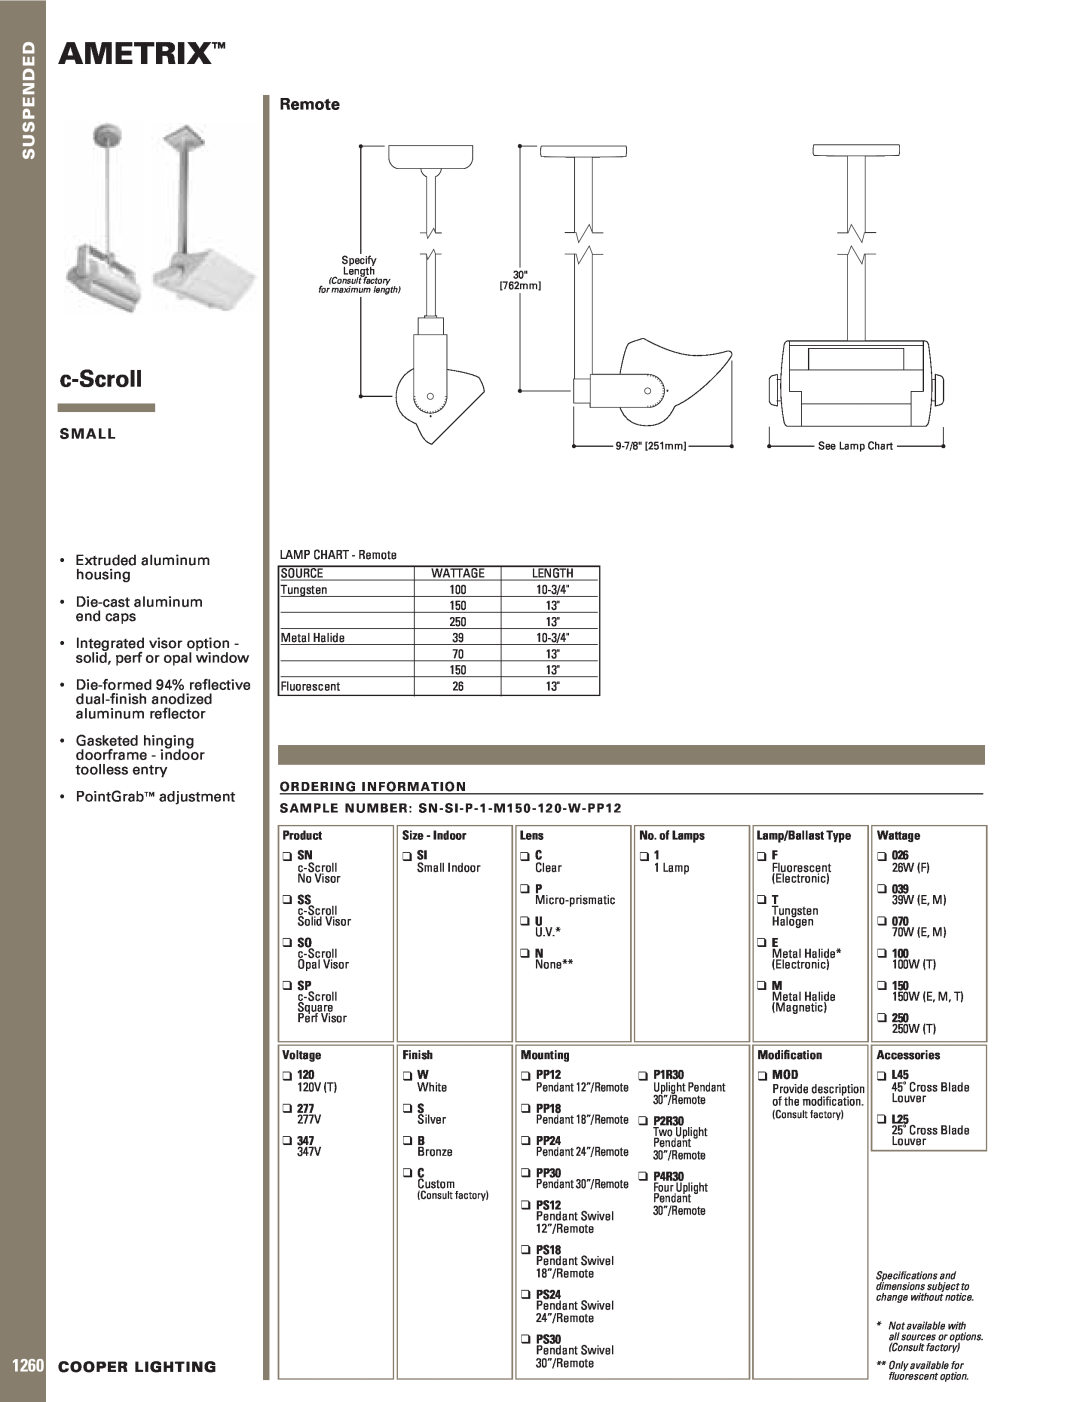 EdgeStar c-Scroll specifications Ametrix, 1260, Suspended, Remote, S M A L L, Extruded aluminum housing, Cooper Lighting 